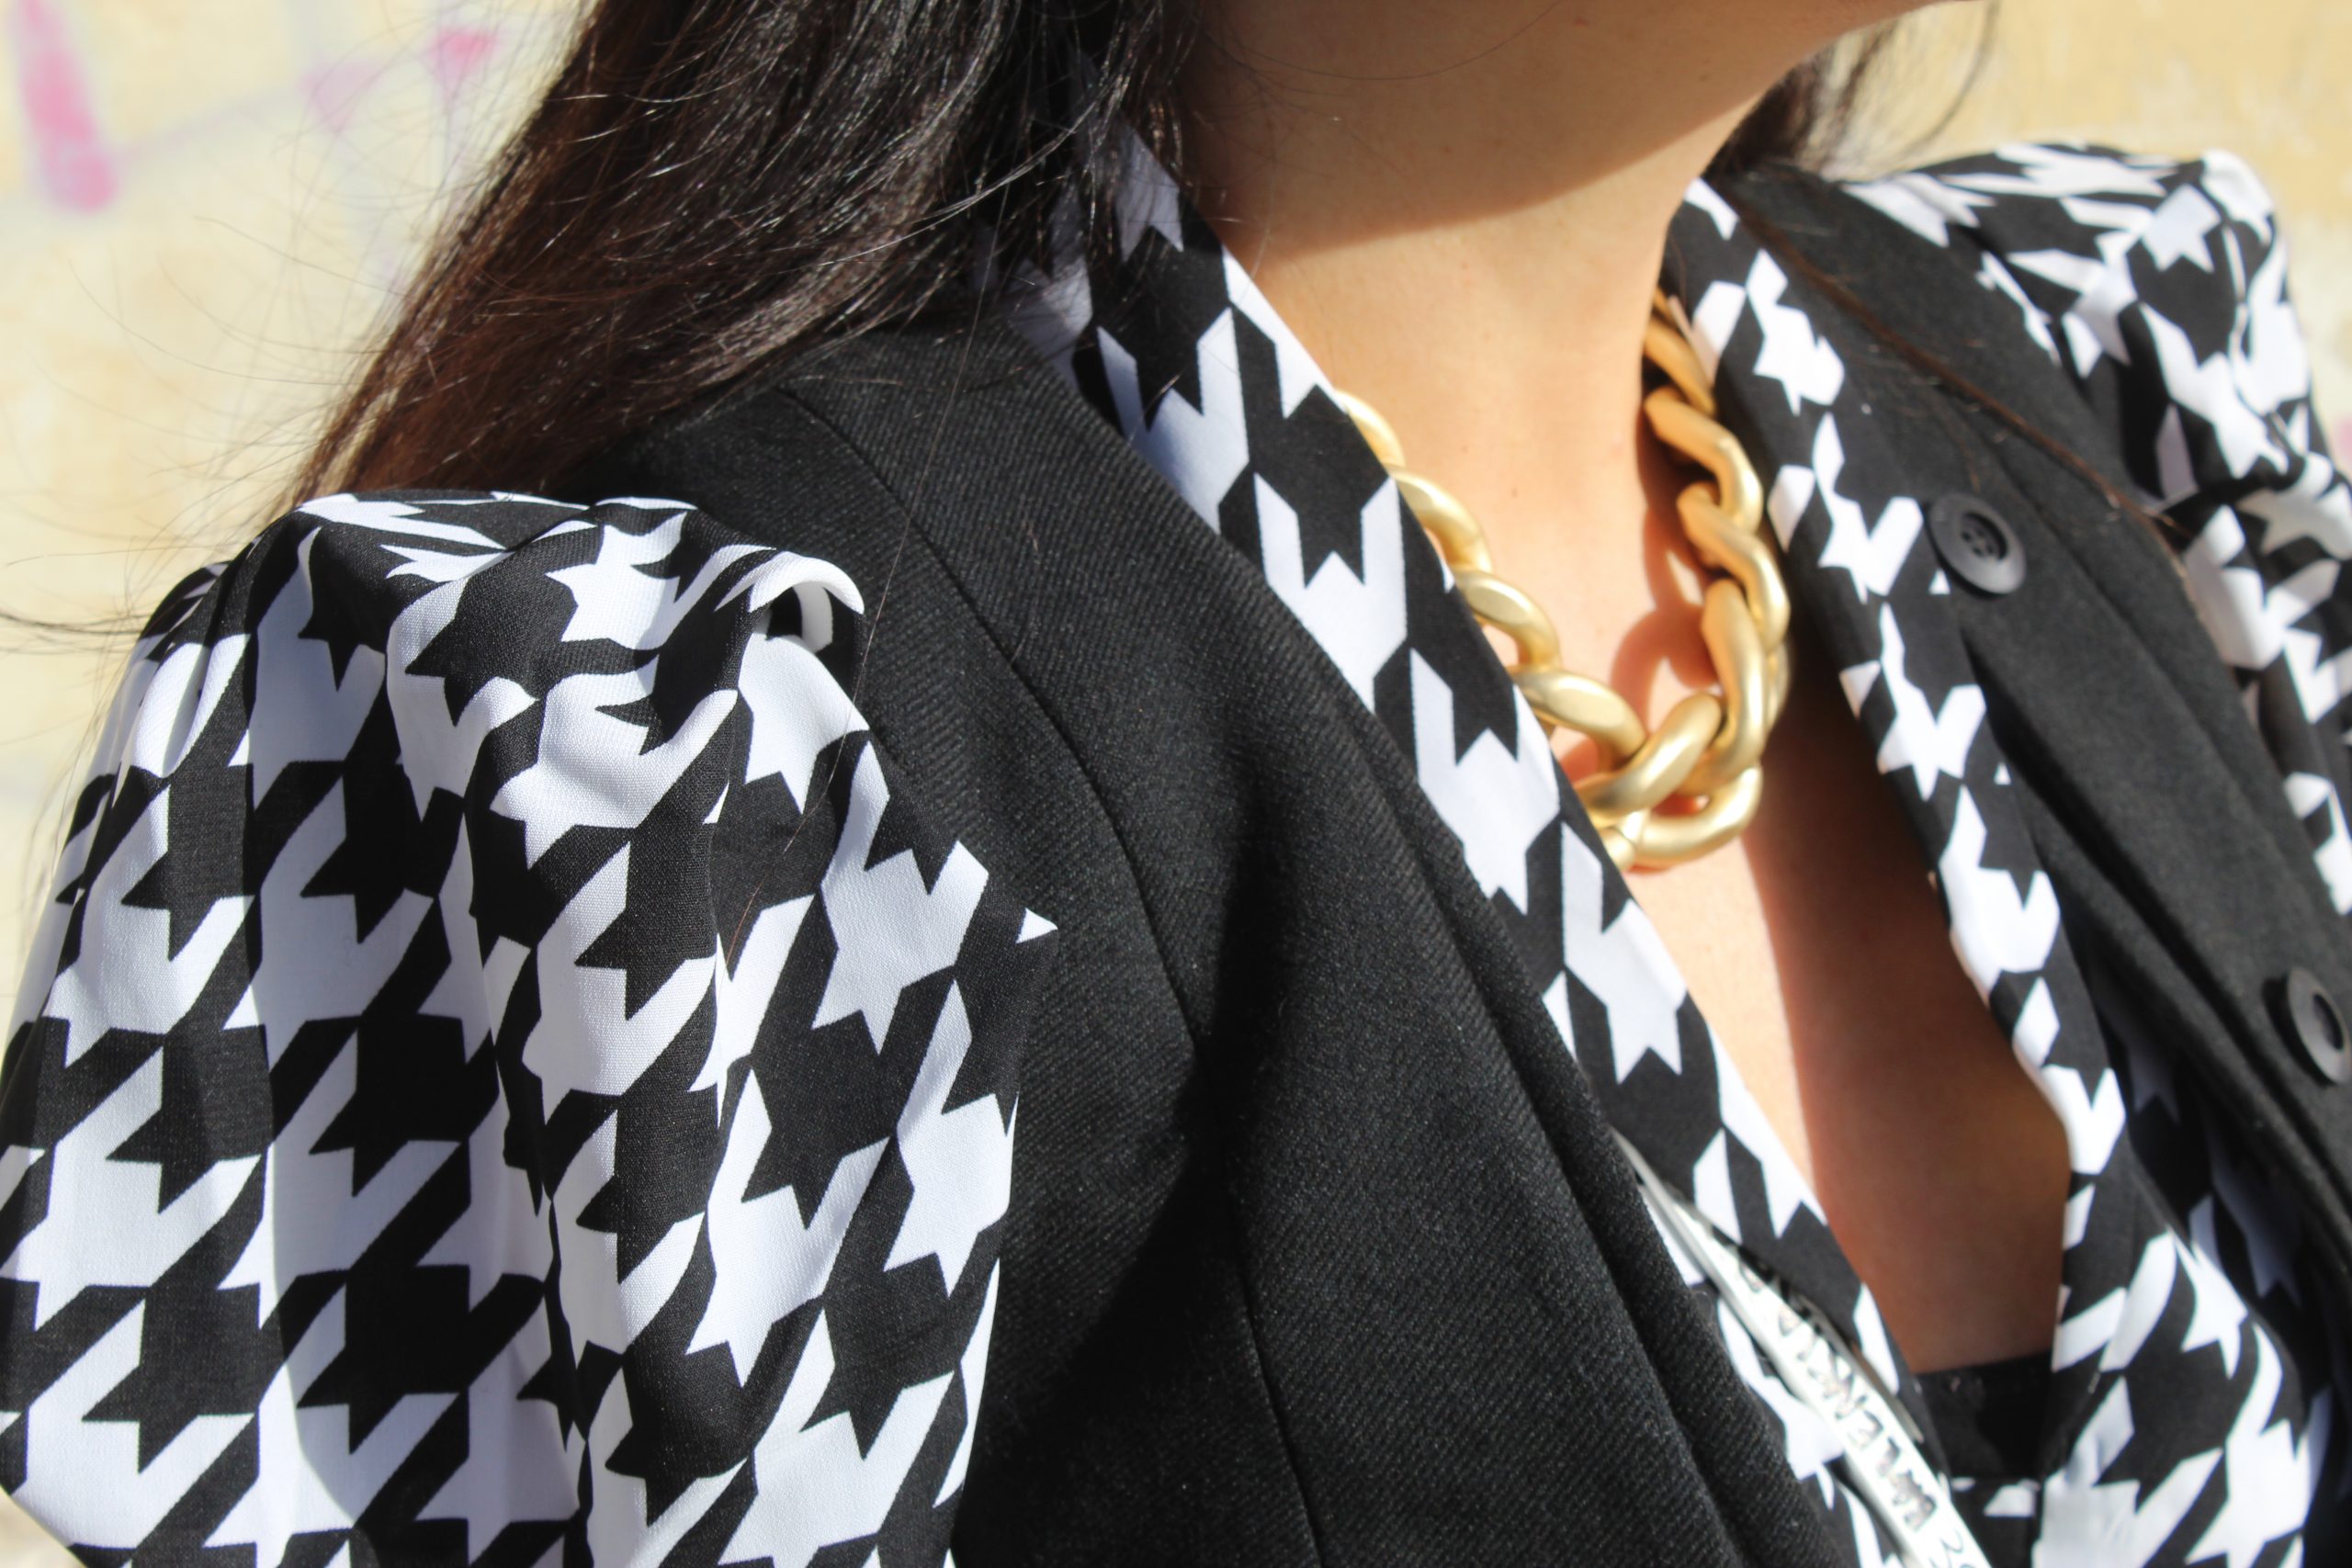 animalier fabric prints black and white outfit Prada accessories 